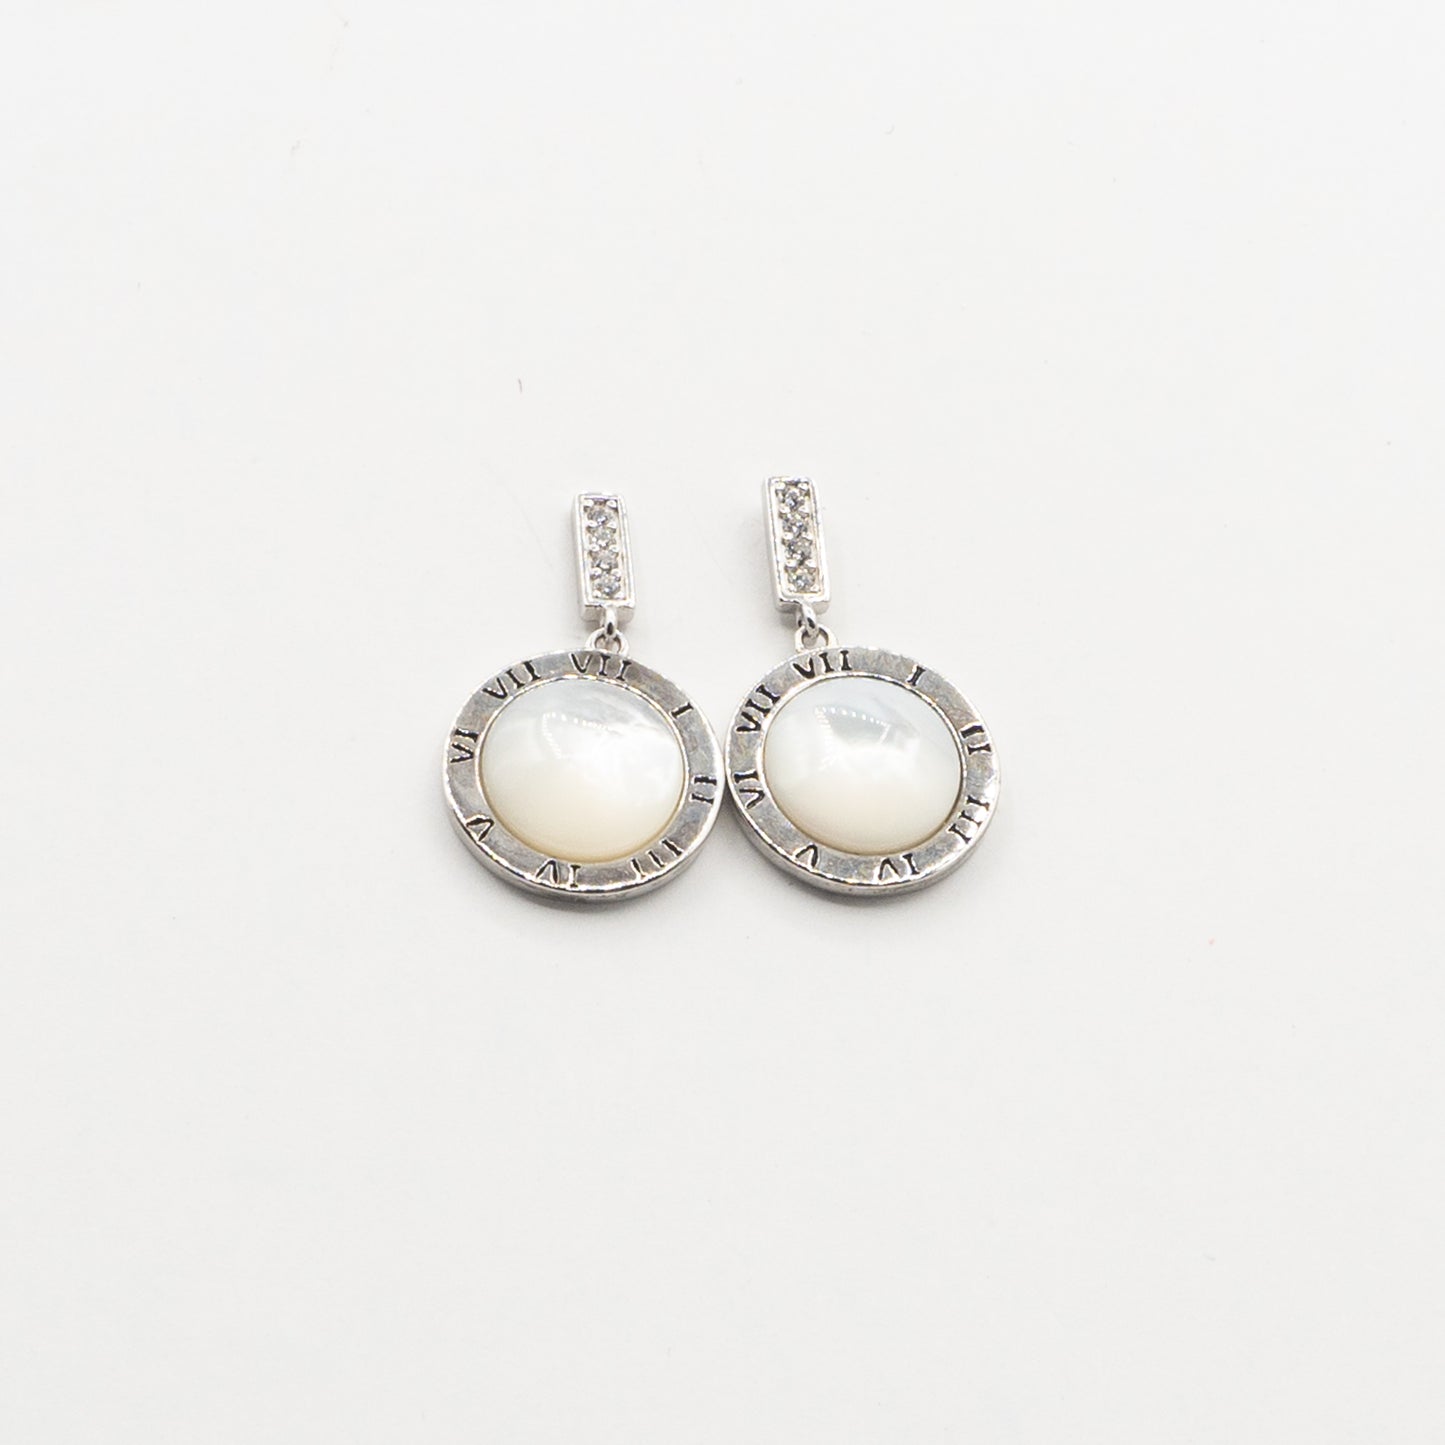 DK-925-136 sterling silver mother of pearl studs